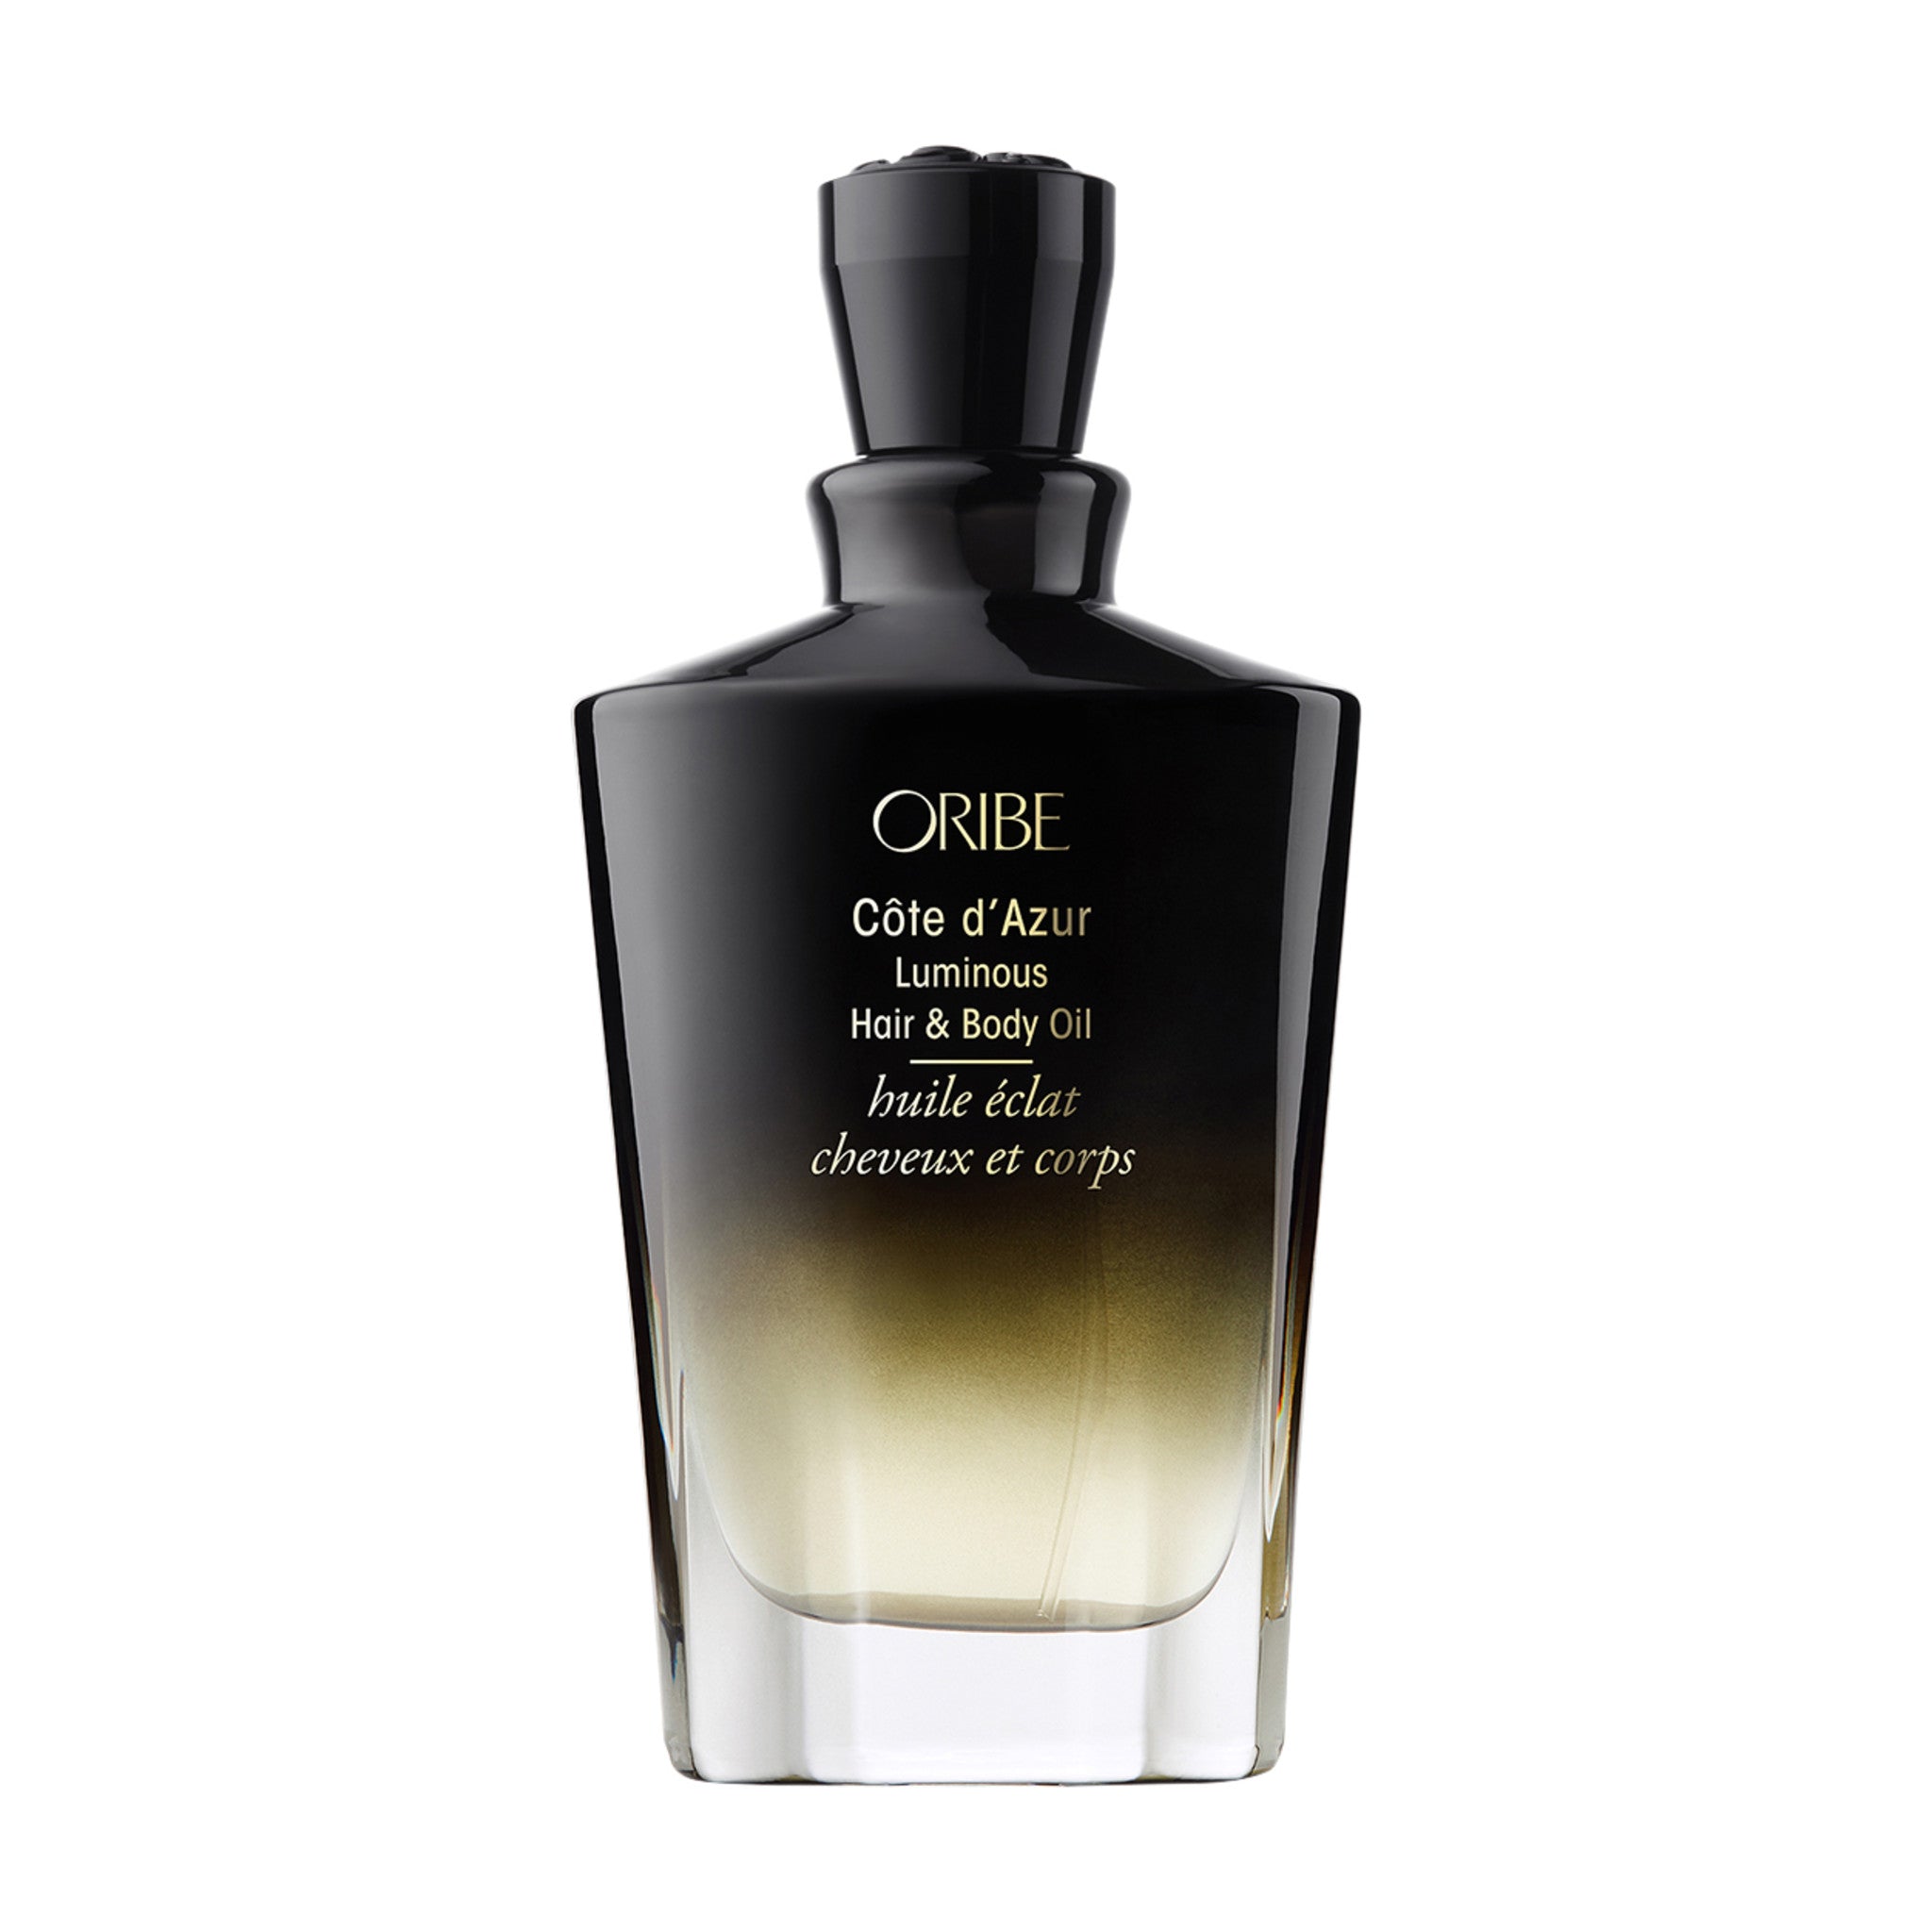 Oribe Cote d’Azur Hair and Body Oil main image.